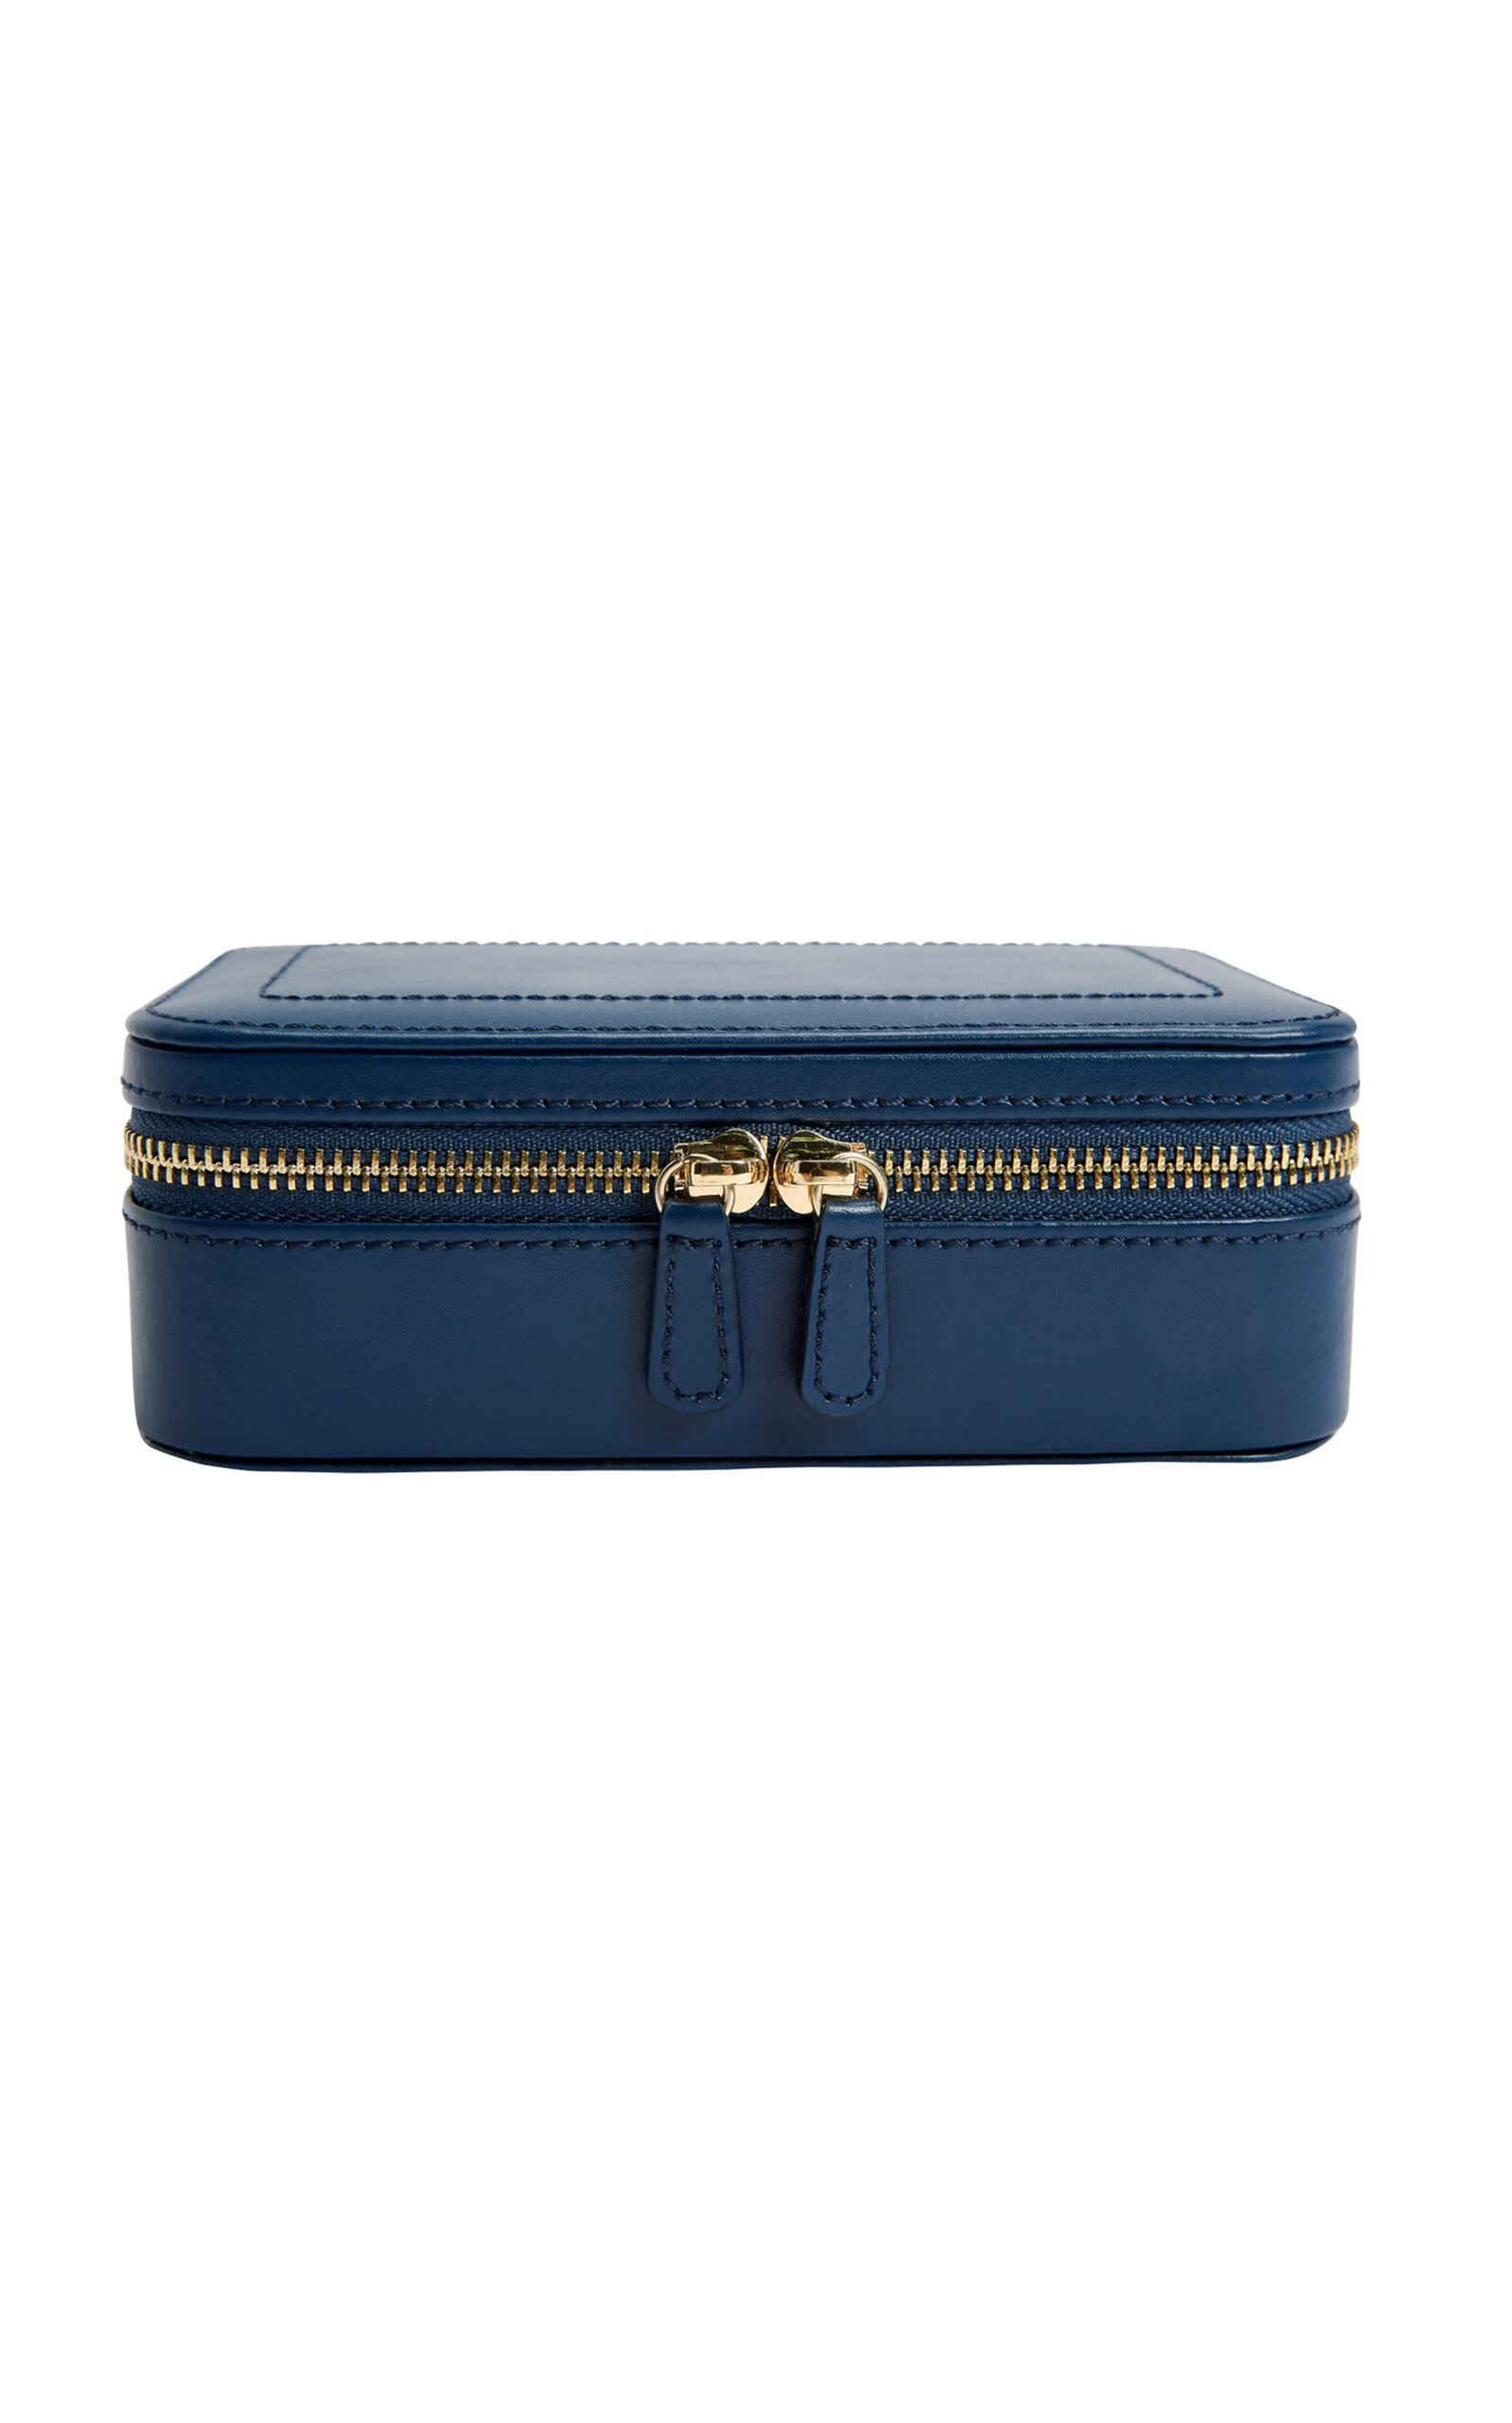 Wolf Sophia Leather Travel Case In Blue